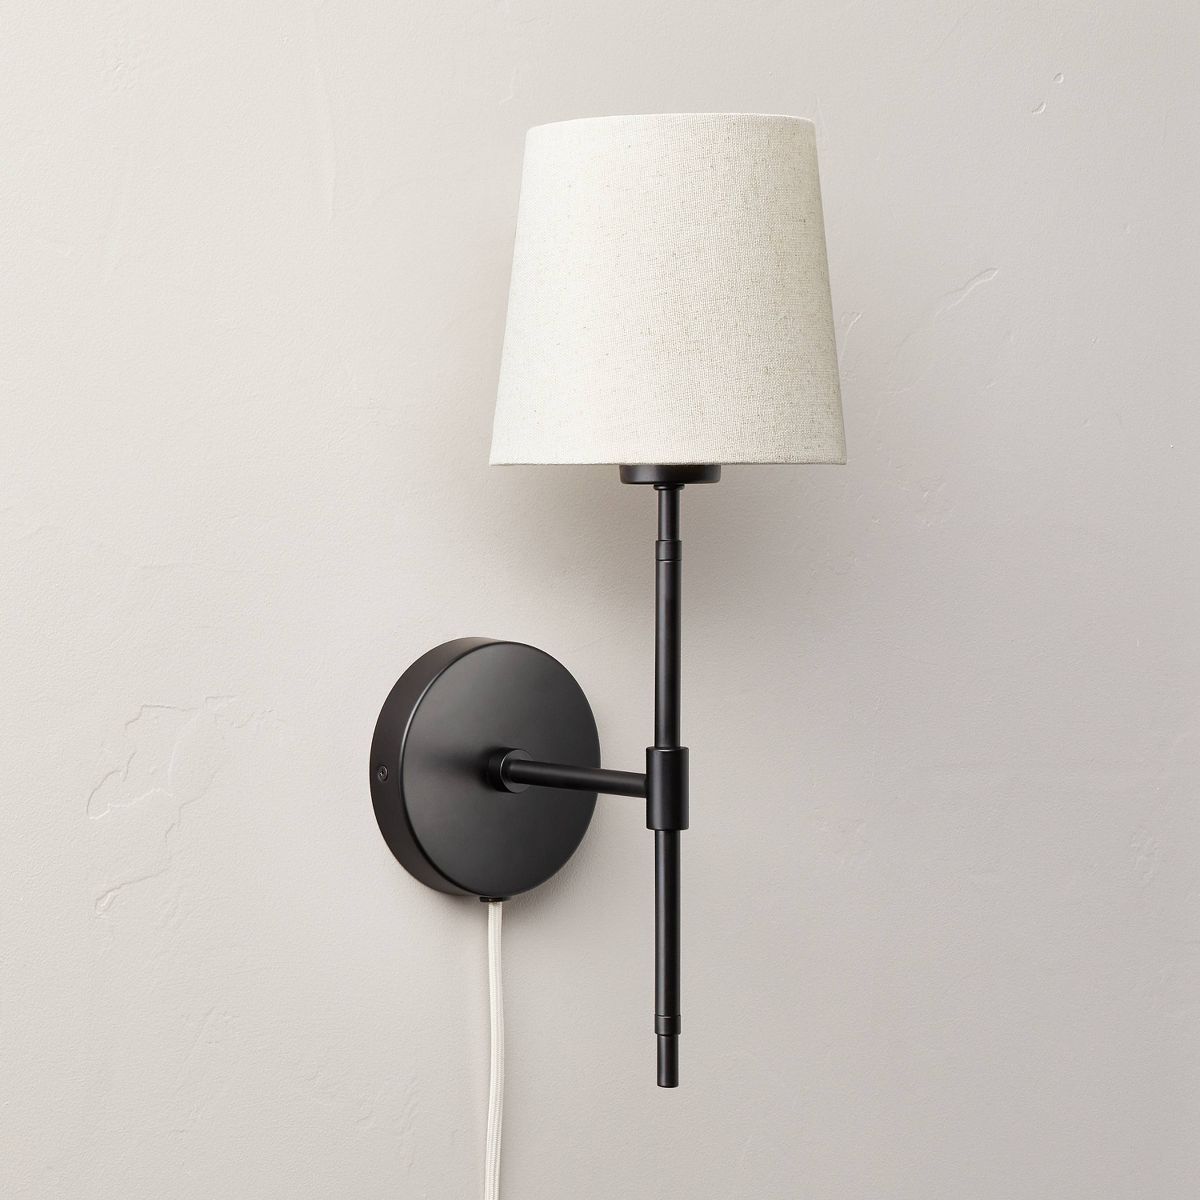 Fabric Shade Wall Sconce Black/Cream - Hearth & Hand™ with Magnolia | Target